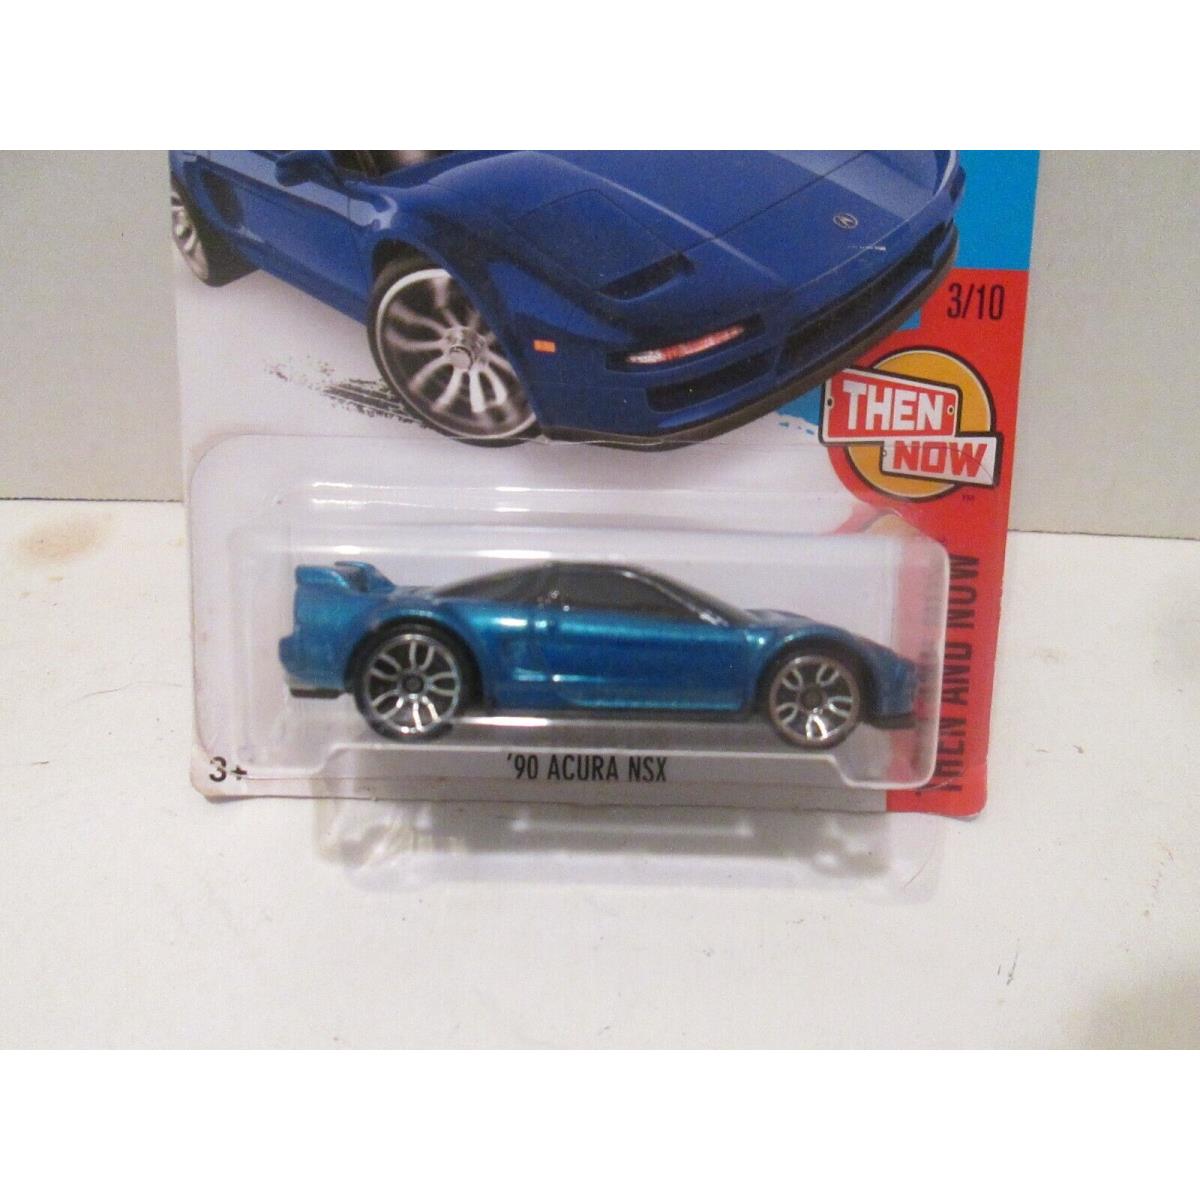 Toys Hot Wheels Then Now 3/10 `90 Acura Nsx Blue 2015 in Package